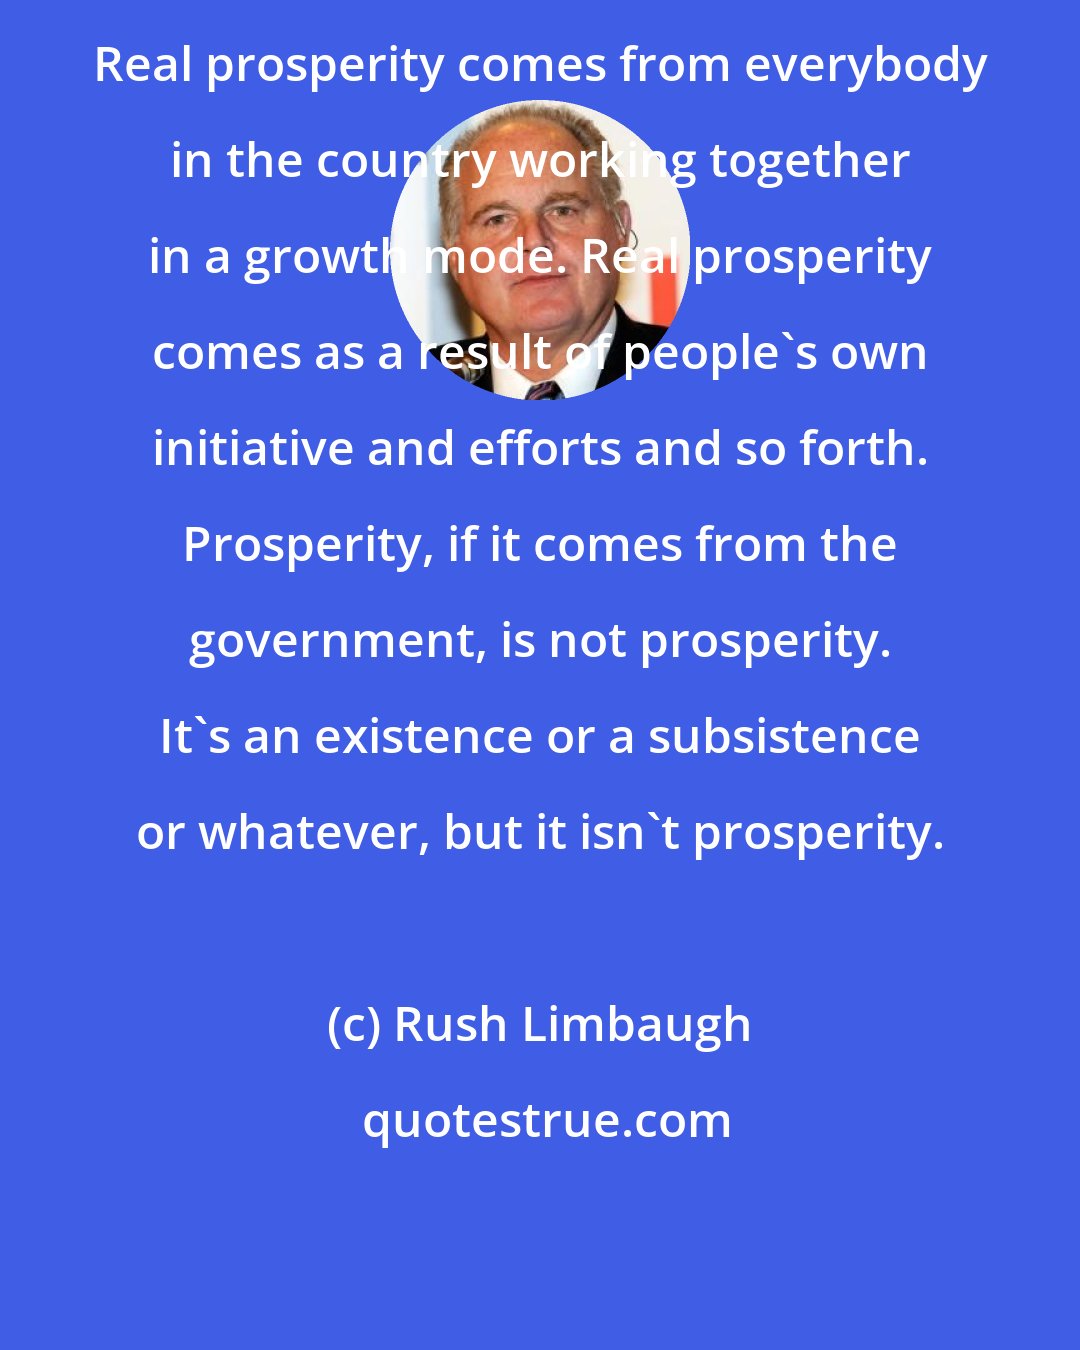 Rush Limbaugh: Real prosperity comes from everybody in the country working together in a growth mode. Real prosperity comes as a result of people's own initiative and efforts and so forth. Prosperity, if it comes from the government, is not prosperity. It's an existence or a subsistence or whatever, but it isn't prosperity.